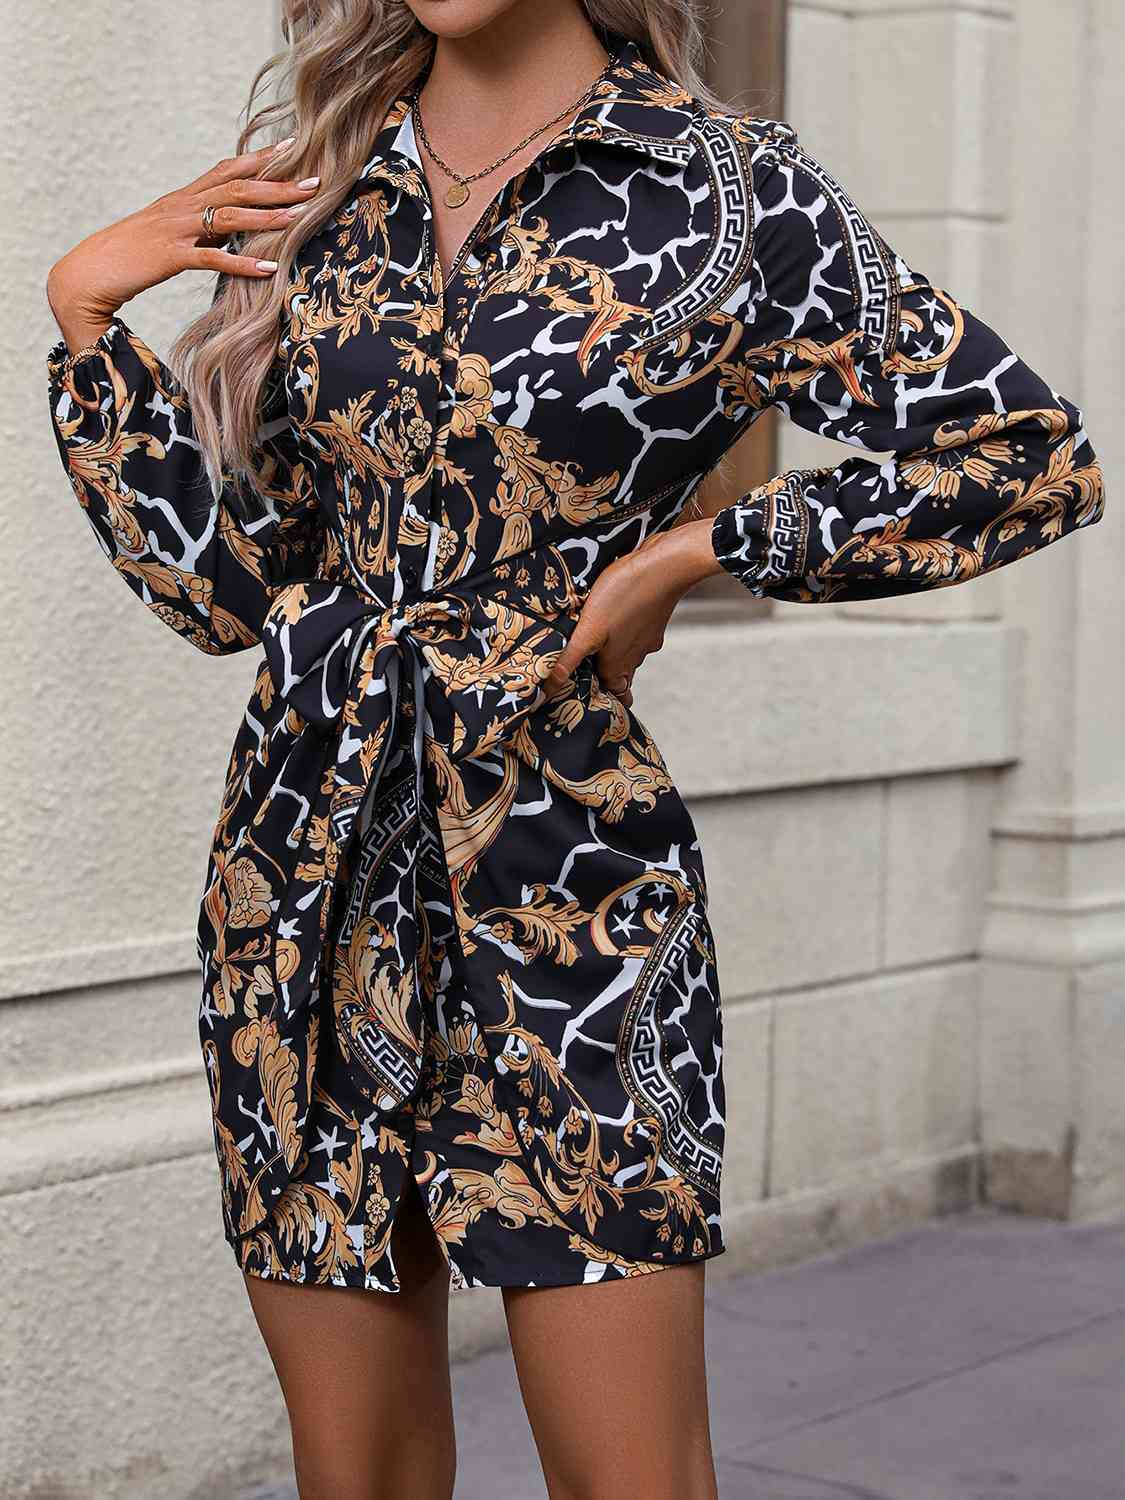 Trendsi Black / S Tie Front Printed Collared Neck Shirt Dress